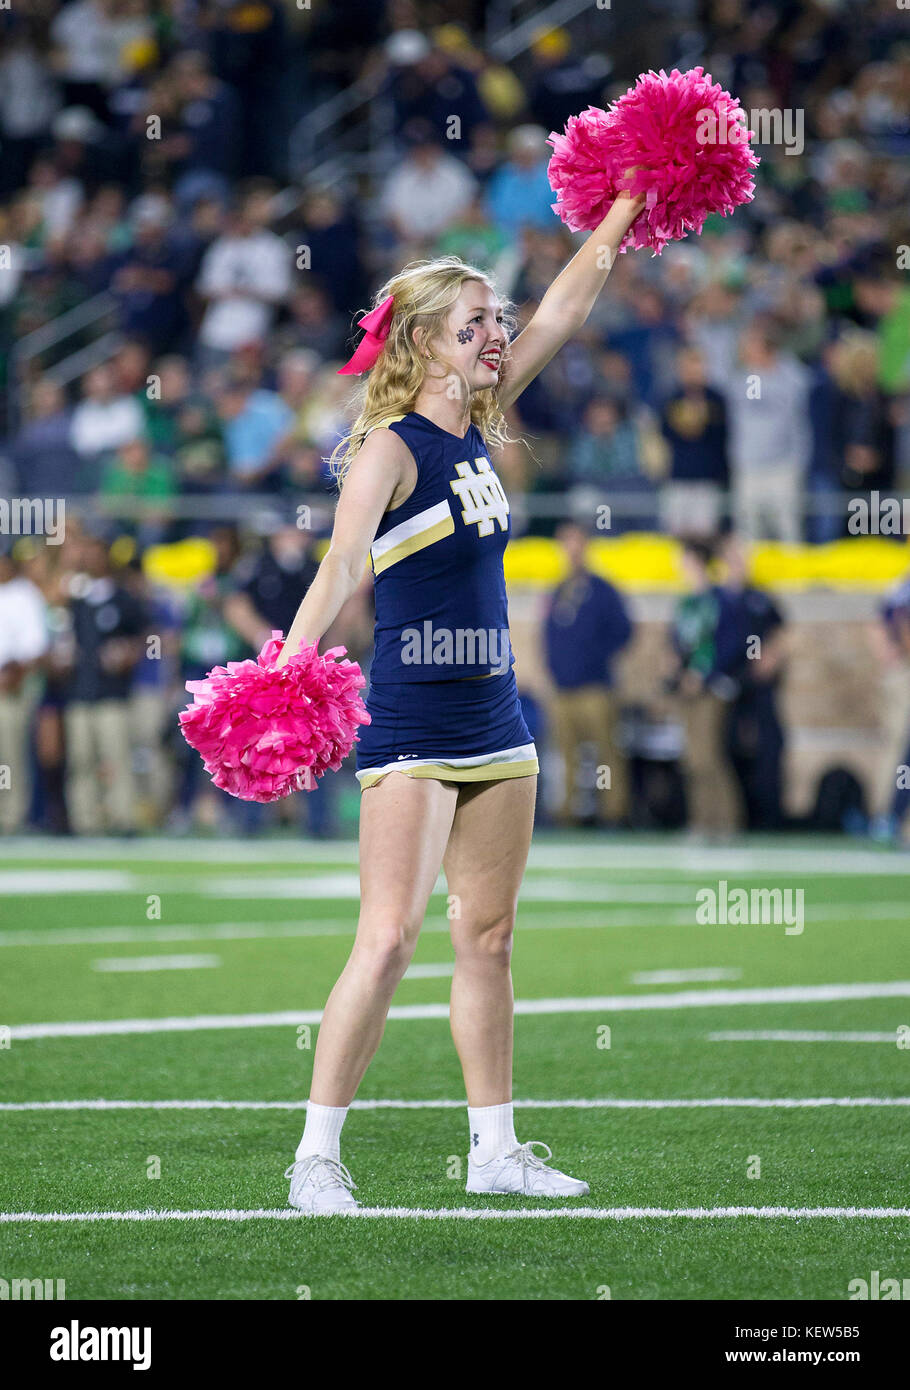 South Bend, Indiana, USA. 21st Oct, 2017. Notre Dame cheerleader performs during NCAA football game action between the USC Trojans and the Notre Dame Fighting Irish at Notre Dame Stadium in South Bend, Indiana. Notre Dame defeated USC 49-14. John Mersits/CSM/Alamy Live News Stock Photo